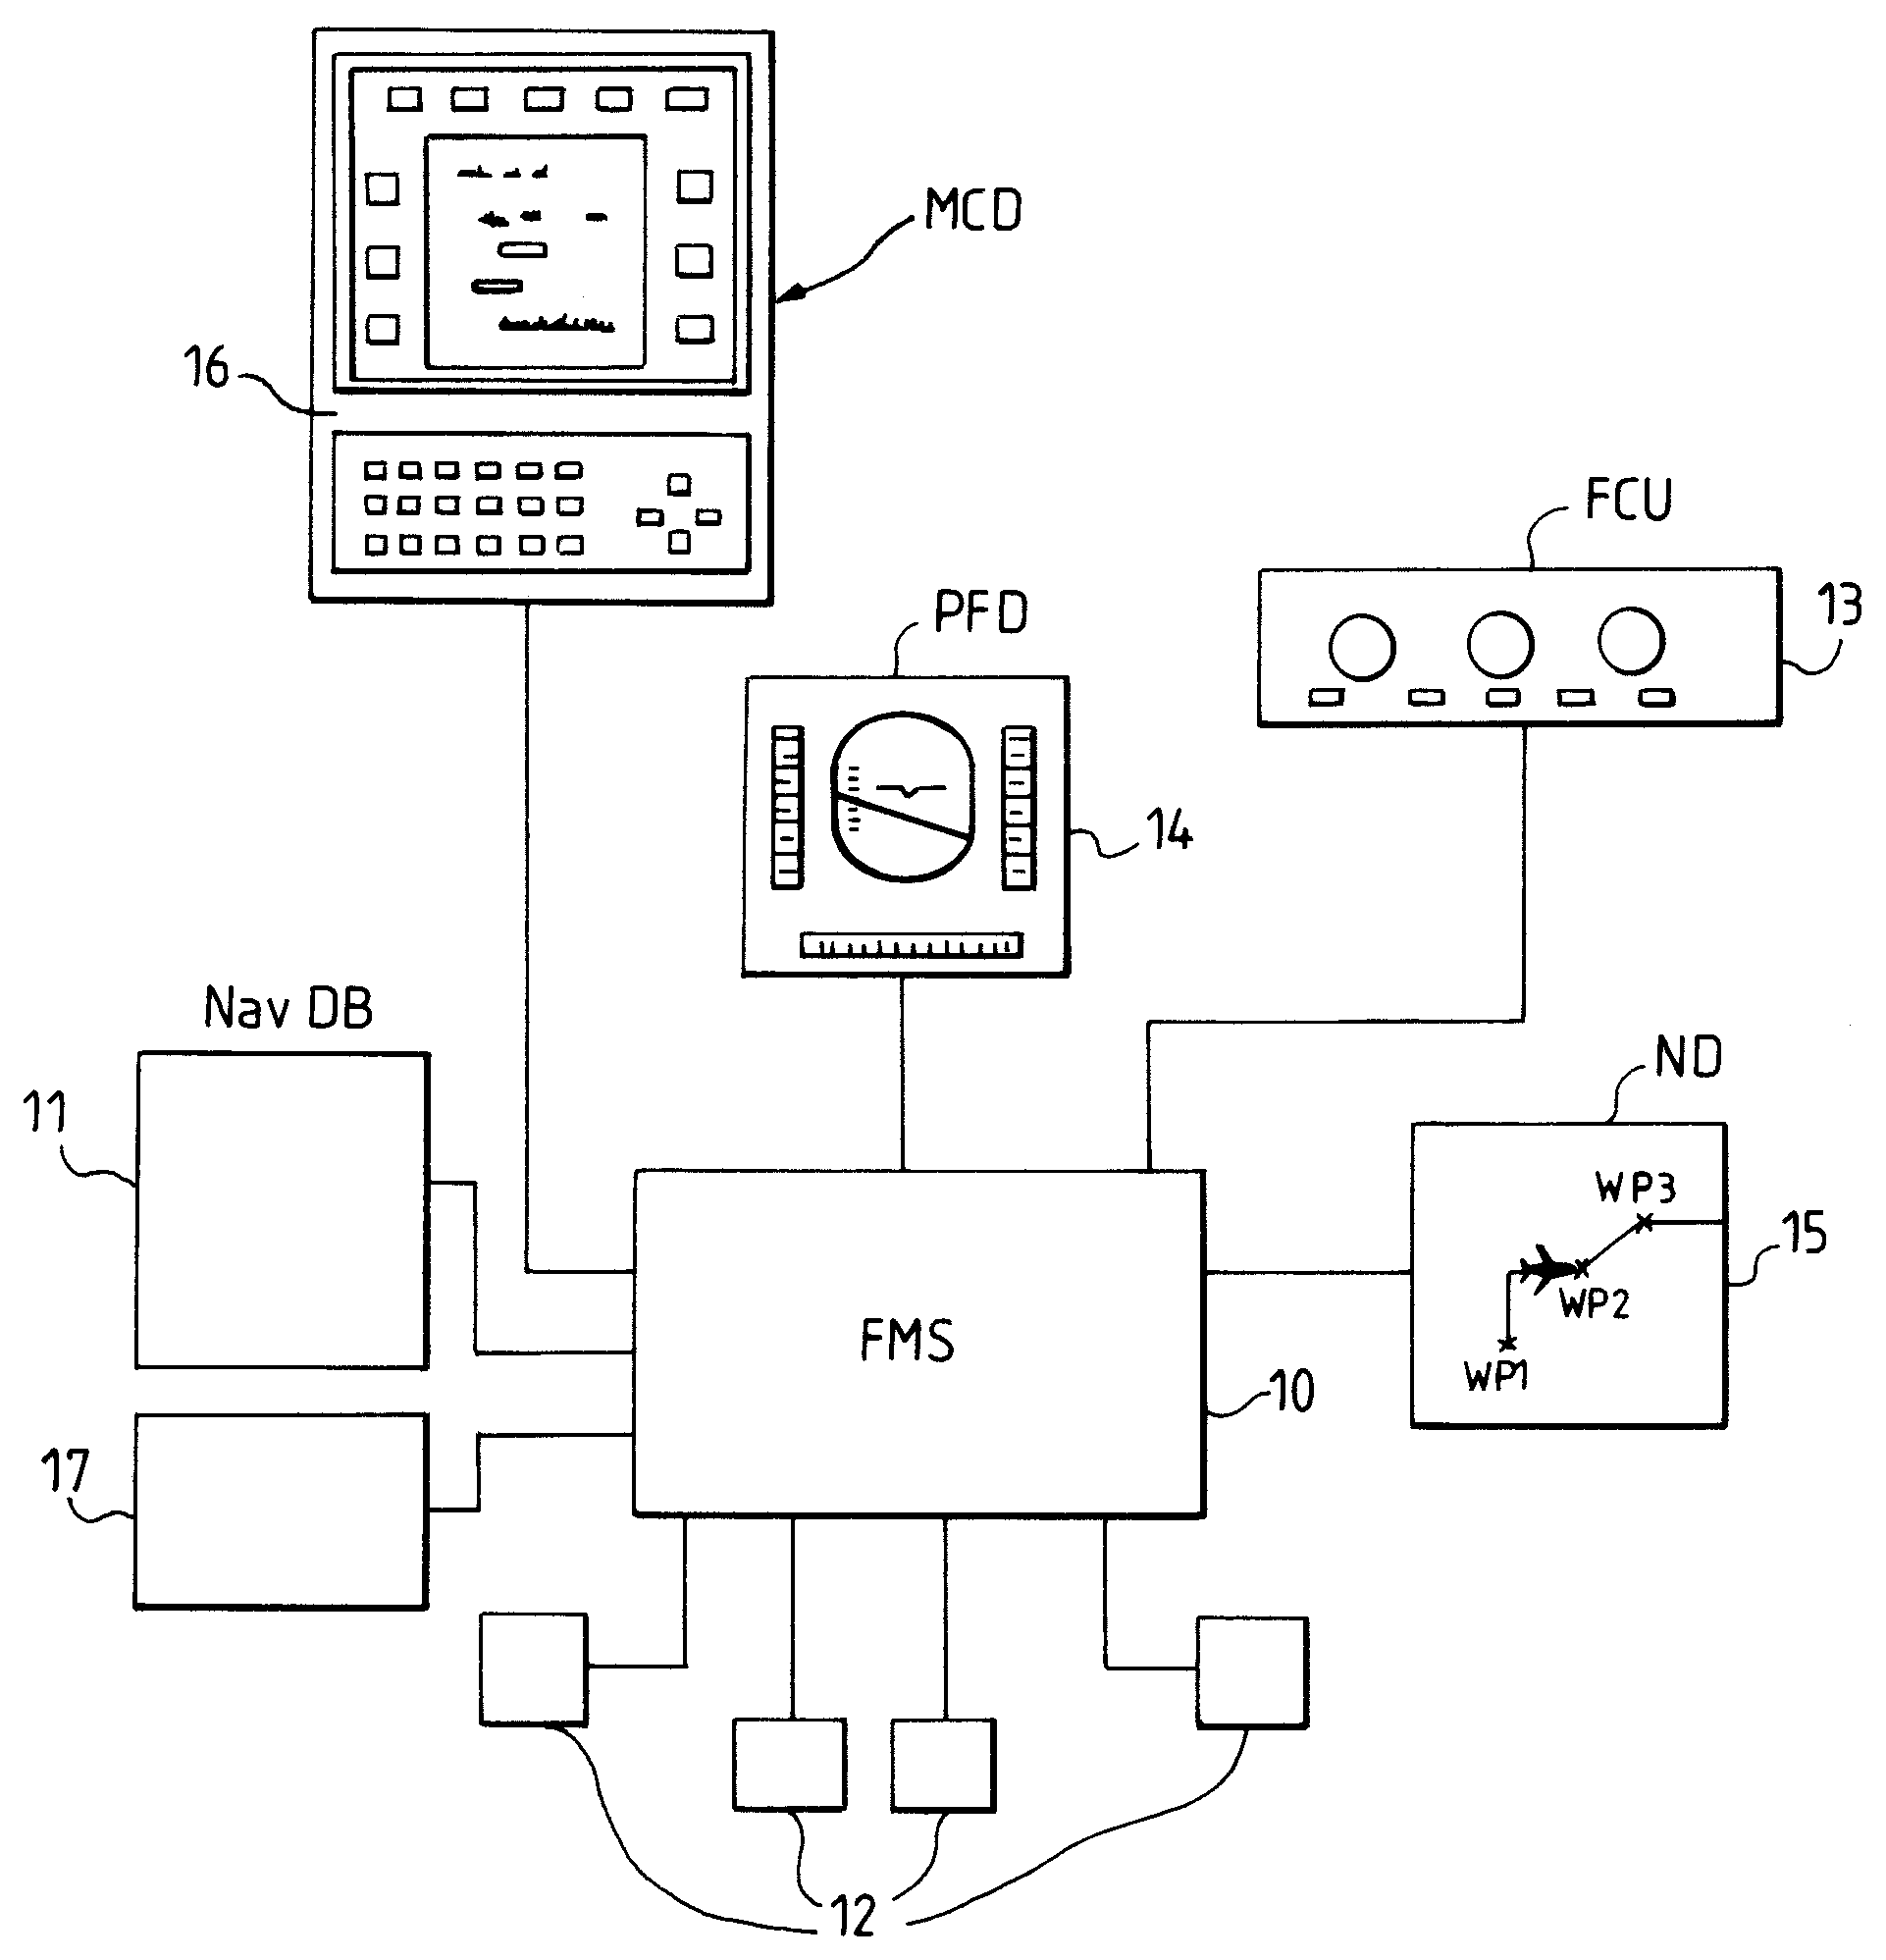 System for Managing the Terminal Part of a Flight Plan